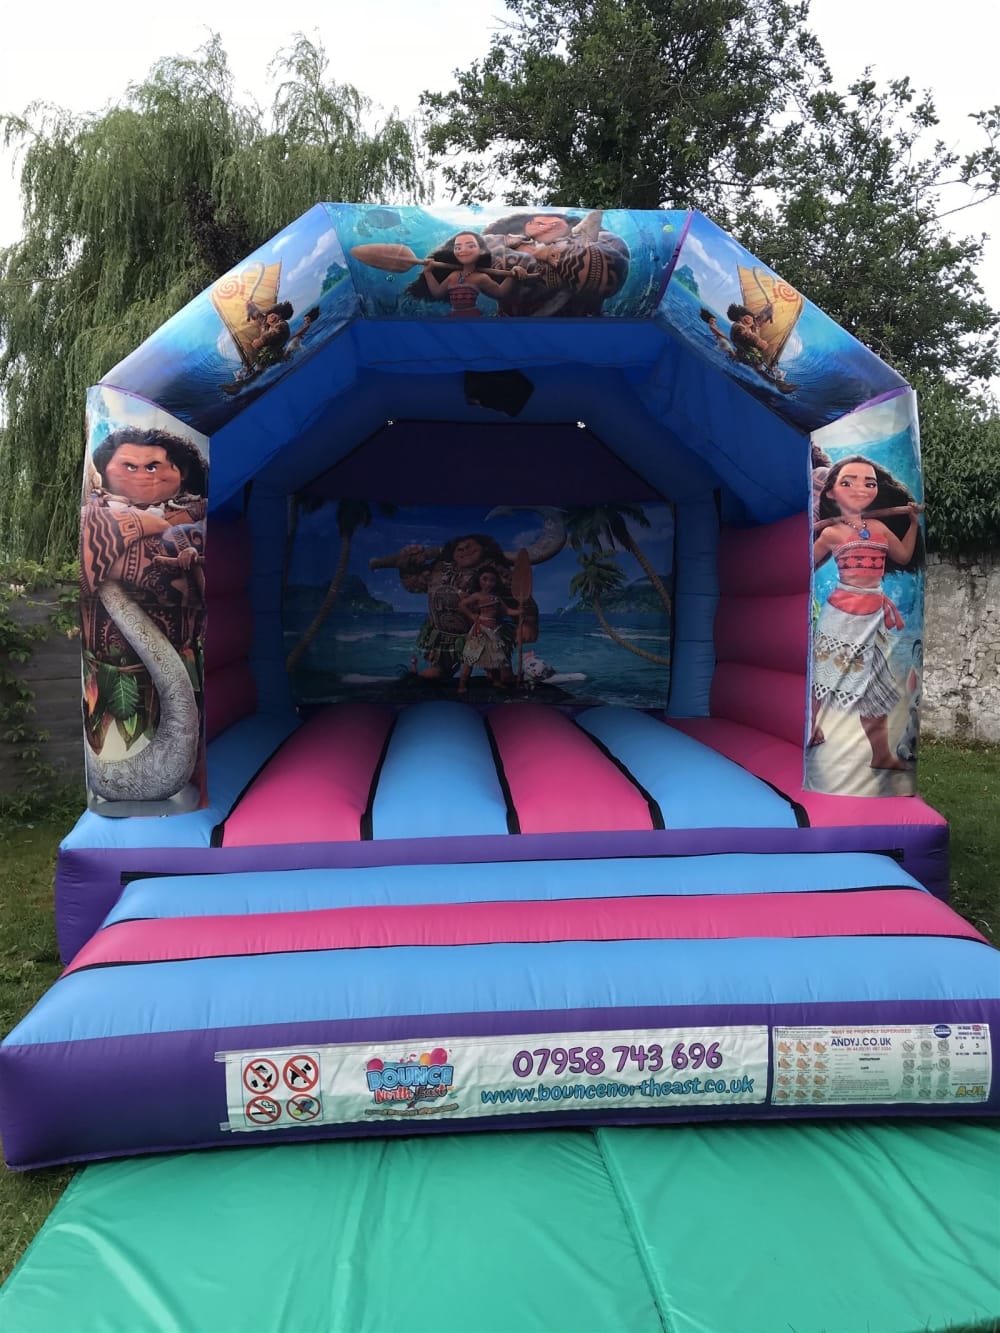 12ft X 15ft Moana Bouncy Castle Bouncy Castle Hire And Kids Party Packages In South Shields Newcastle Sunderland Durham Tyne And Wear